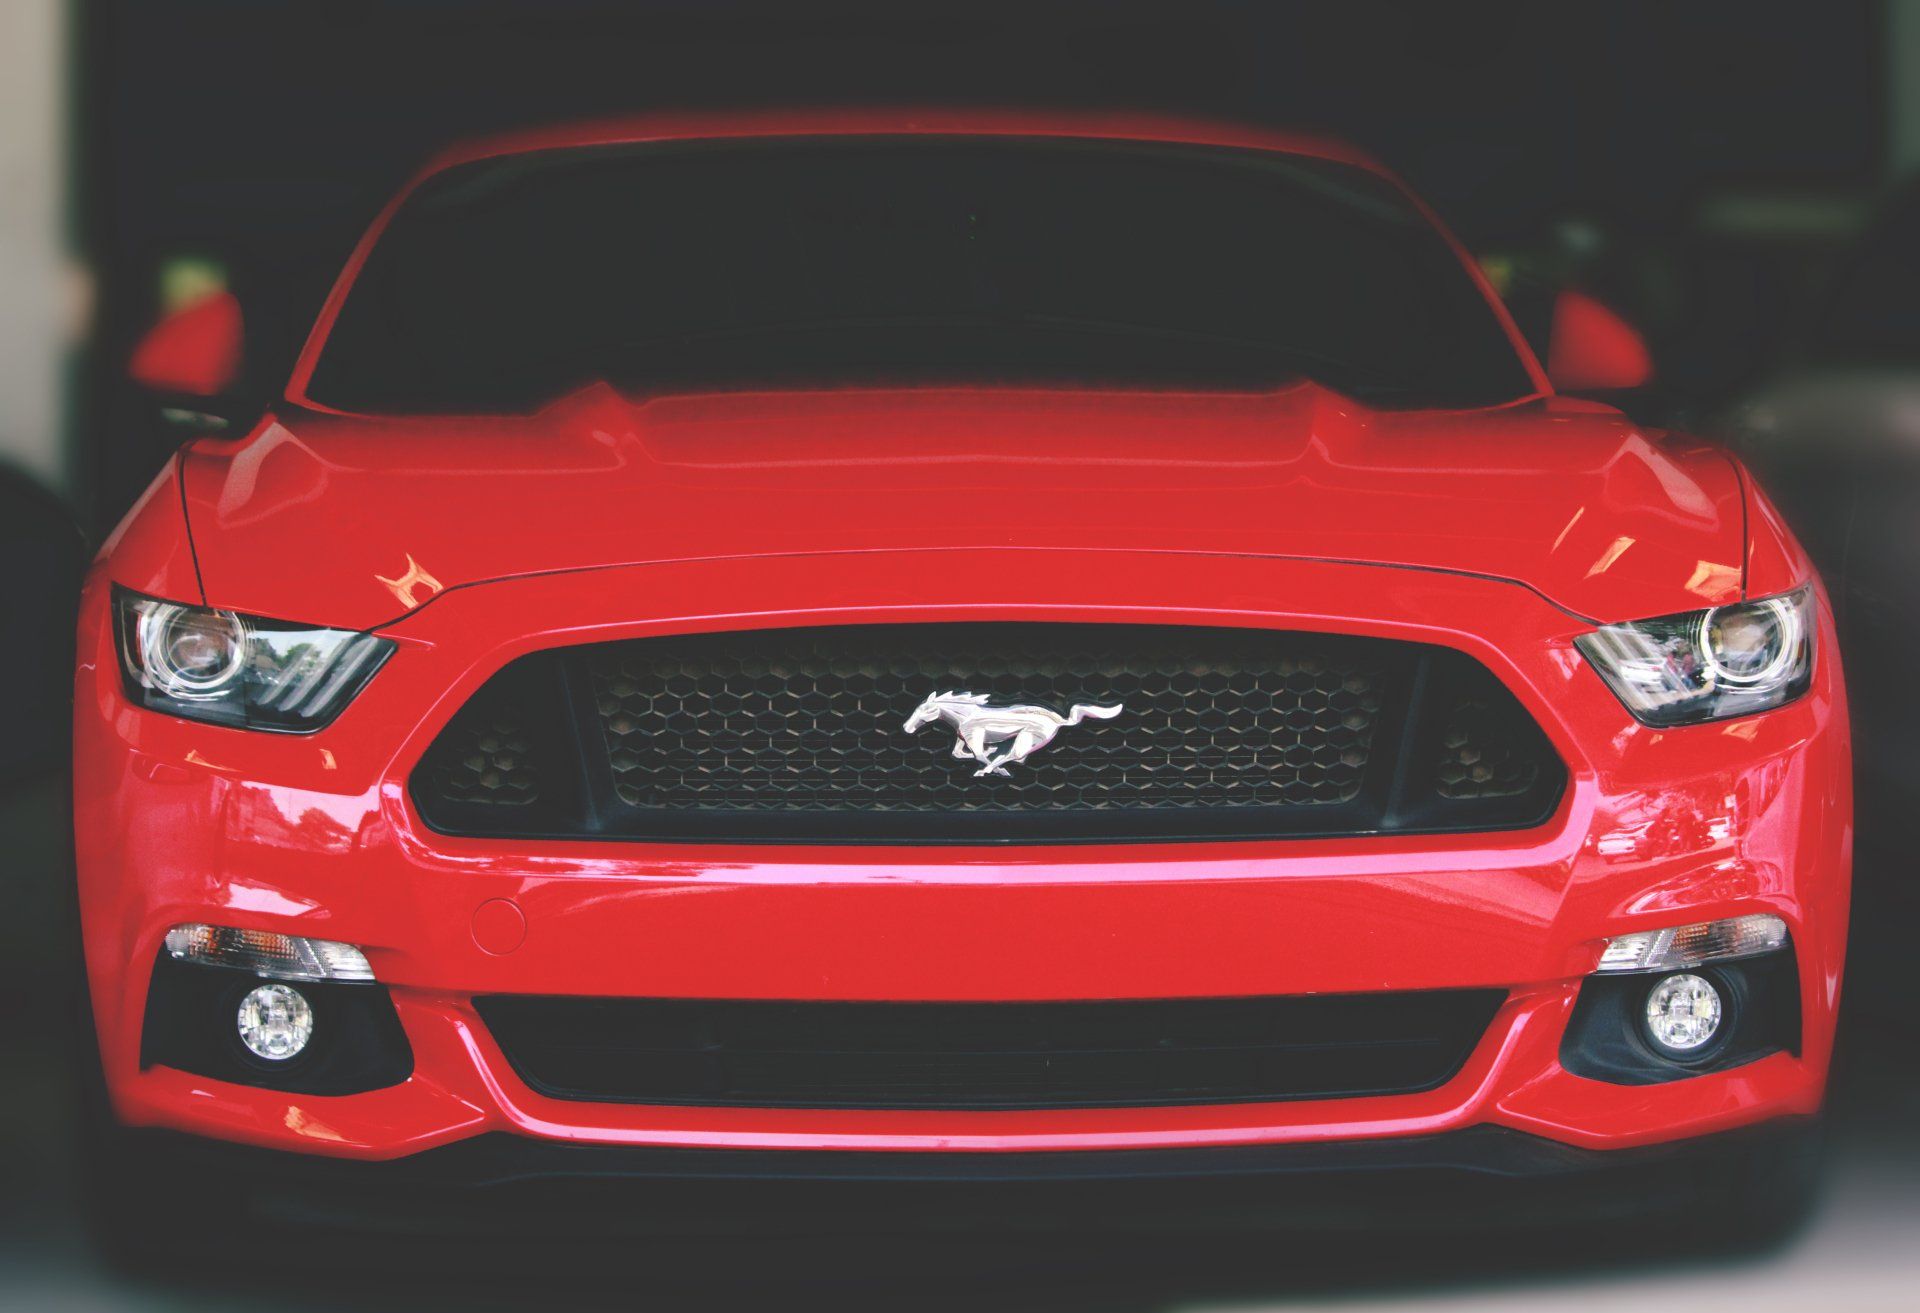 Picture of the front of a Ford Mustang.